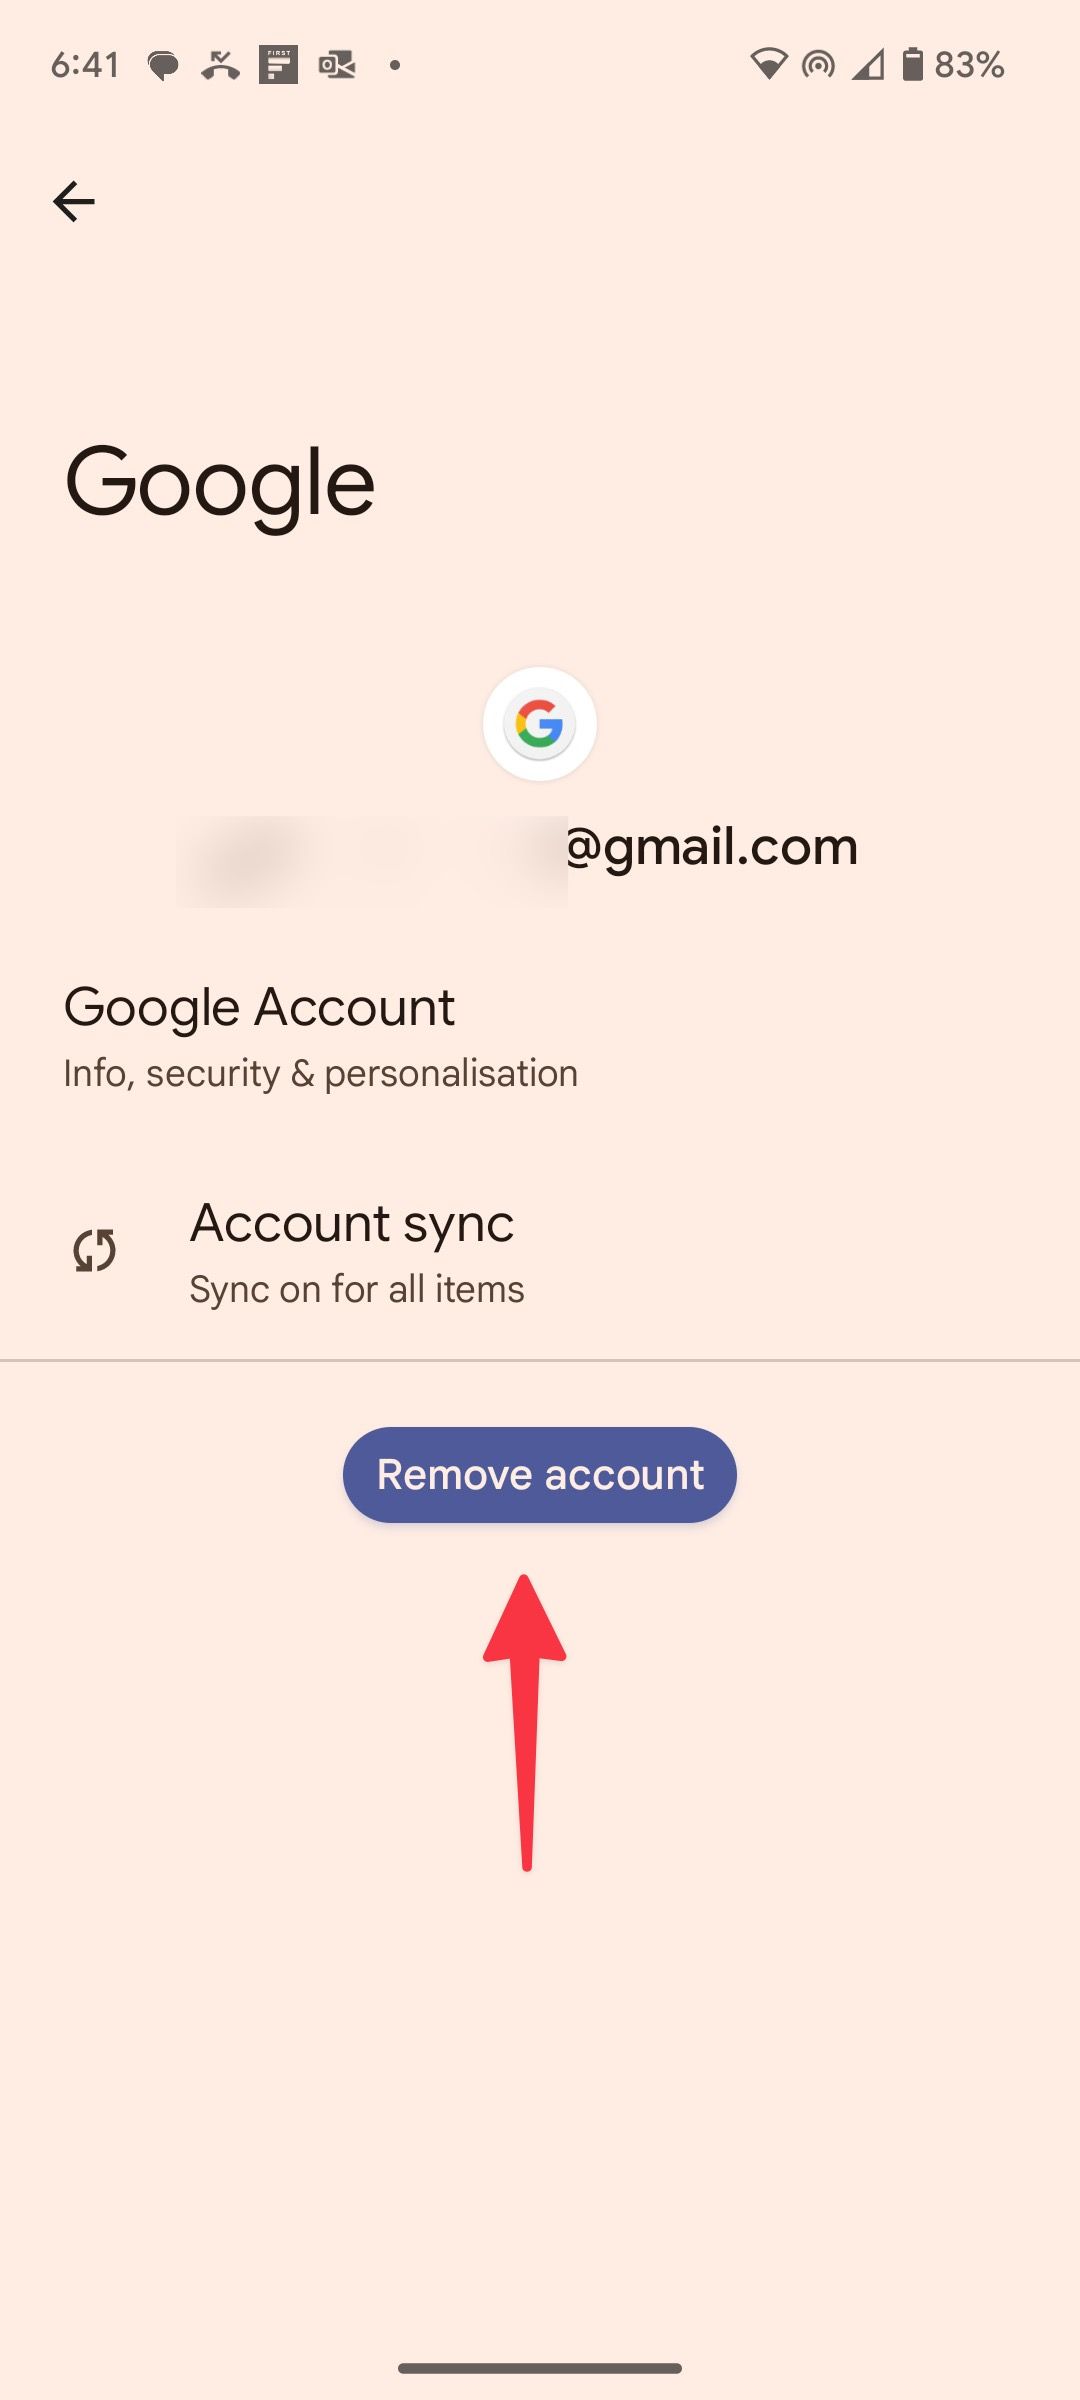 Tap Remove account to remove the Google account from your Android device